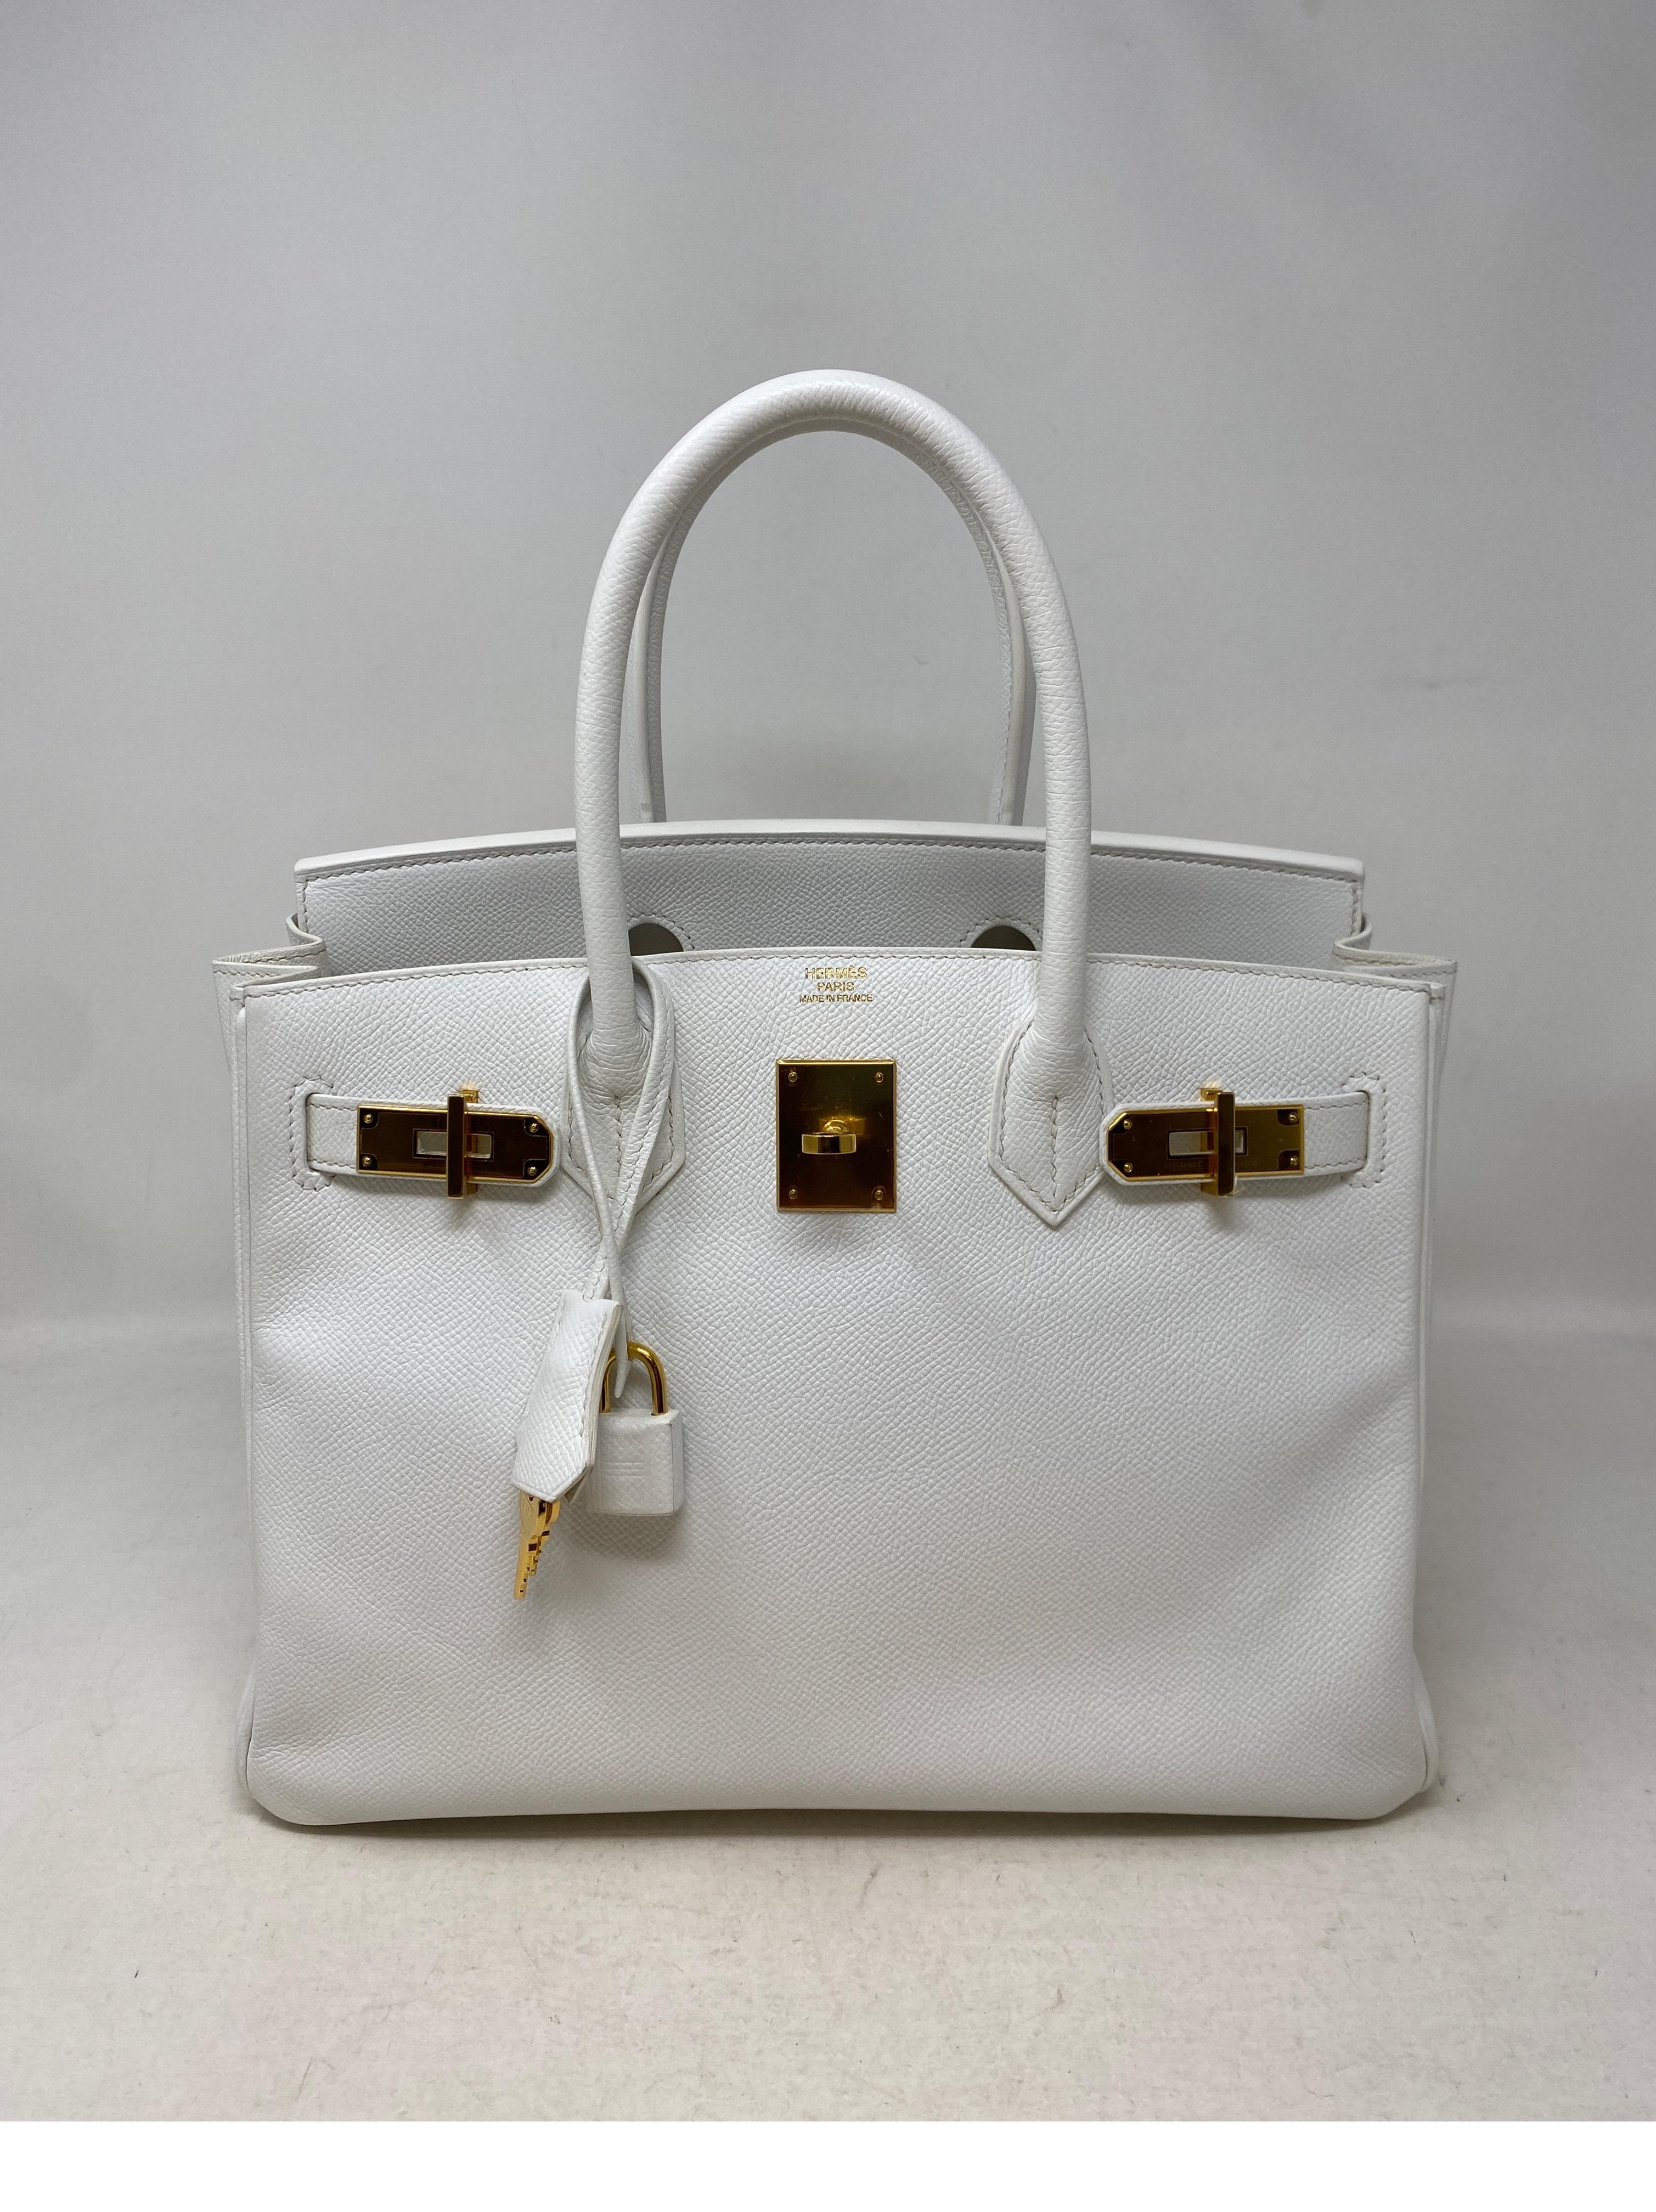 Hermes White Birkin 30 Bag. White epsom leather with gold hardware. Rare white Birkin. The most wanted size 30. Excellent condition. Interior clean. Includes clochette, lock, keys, and dust bag. Guaranteed authentic. 